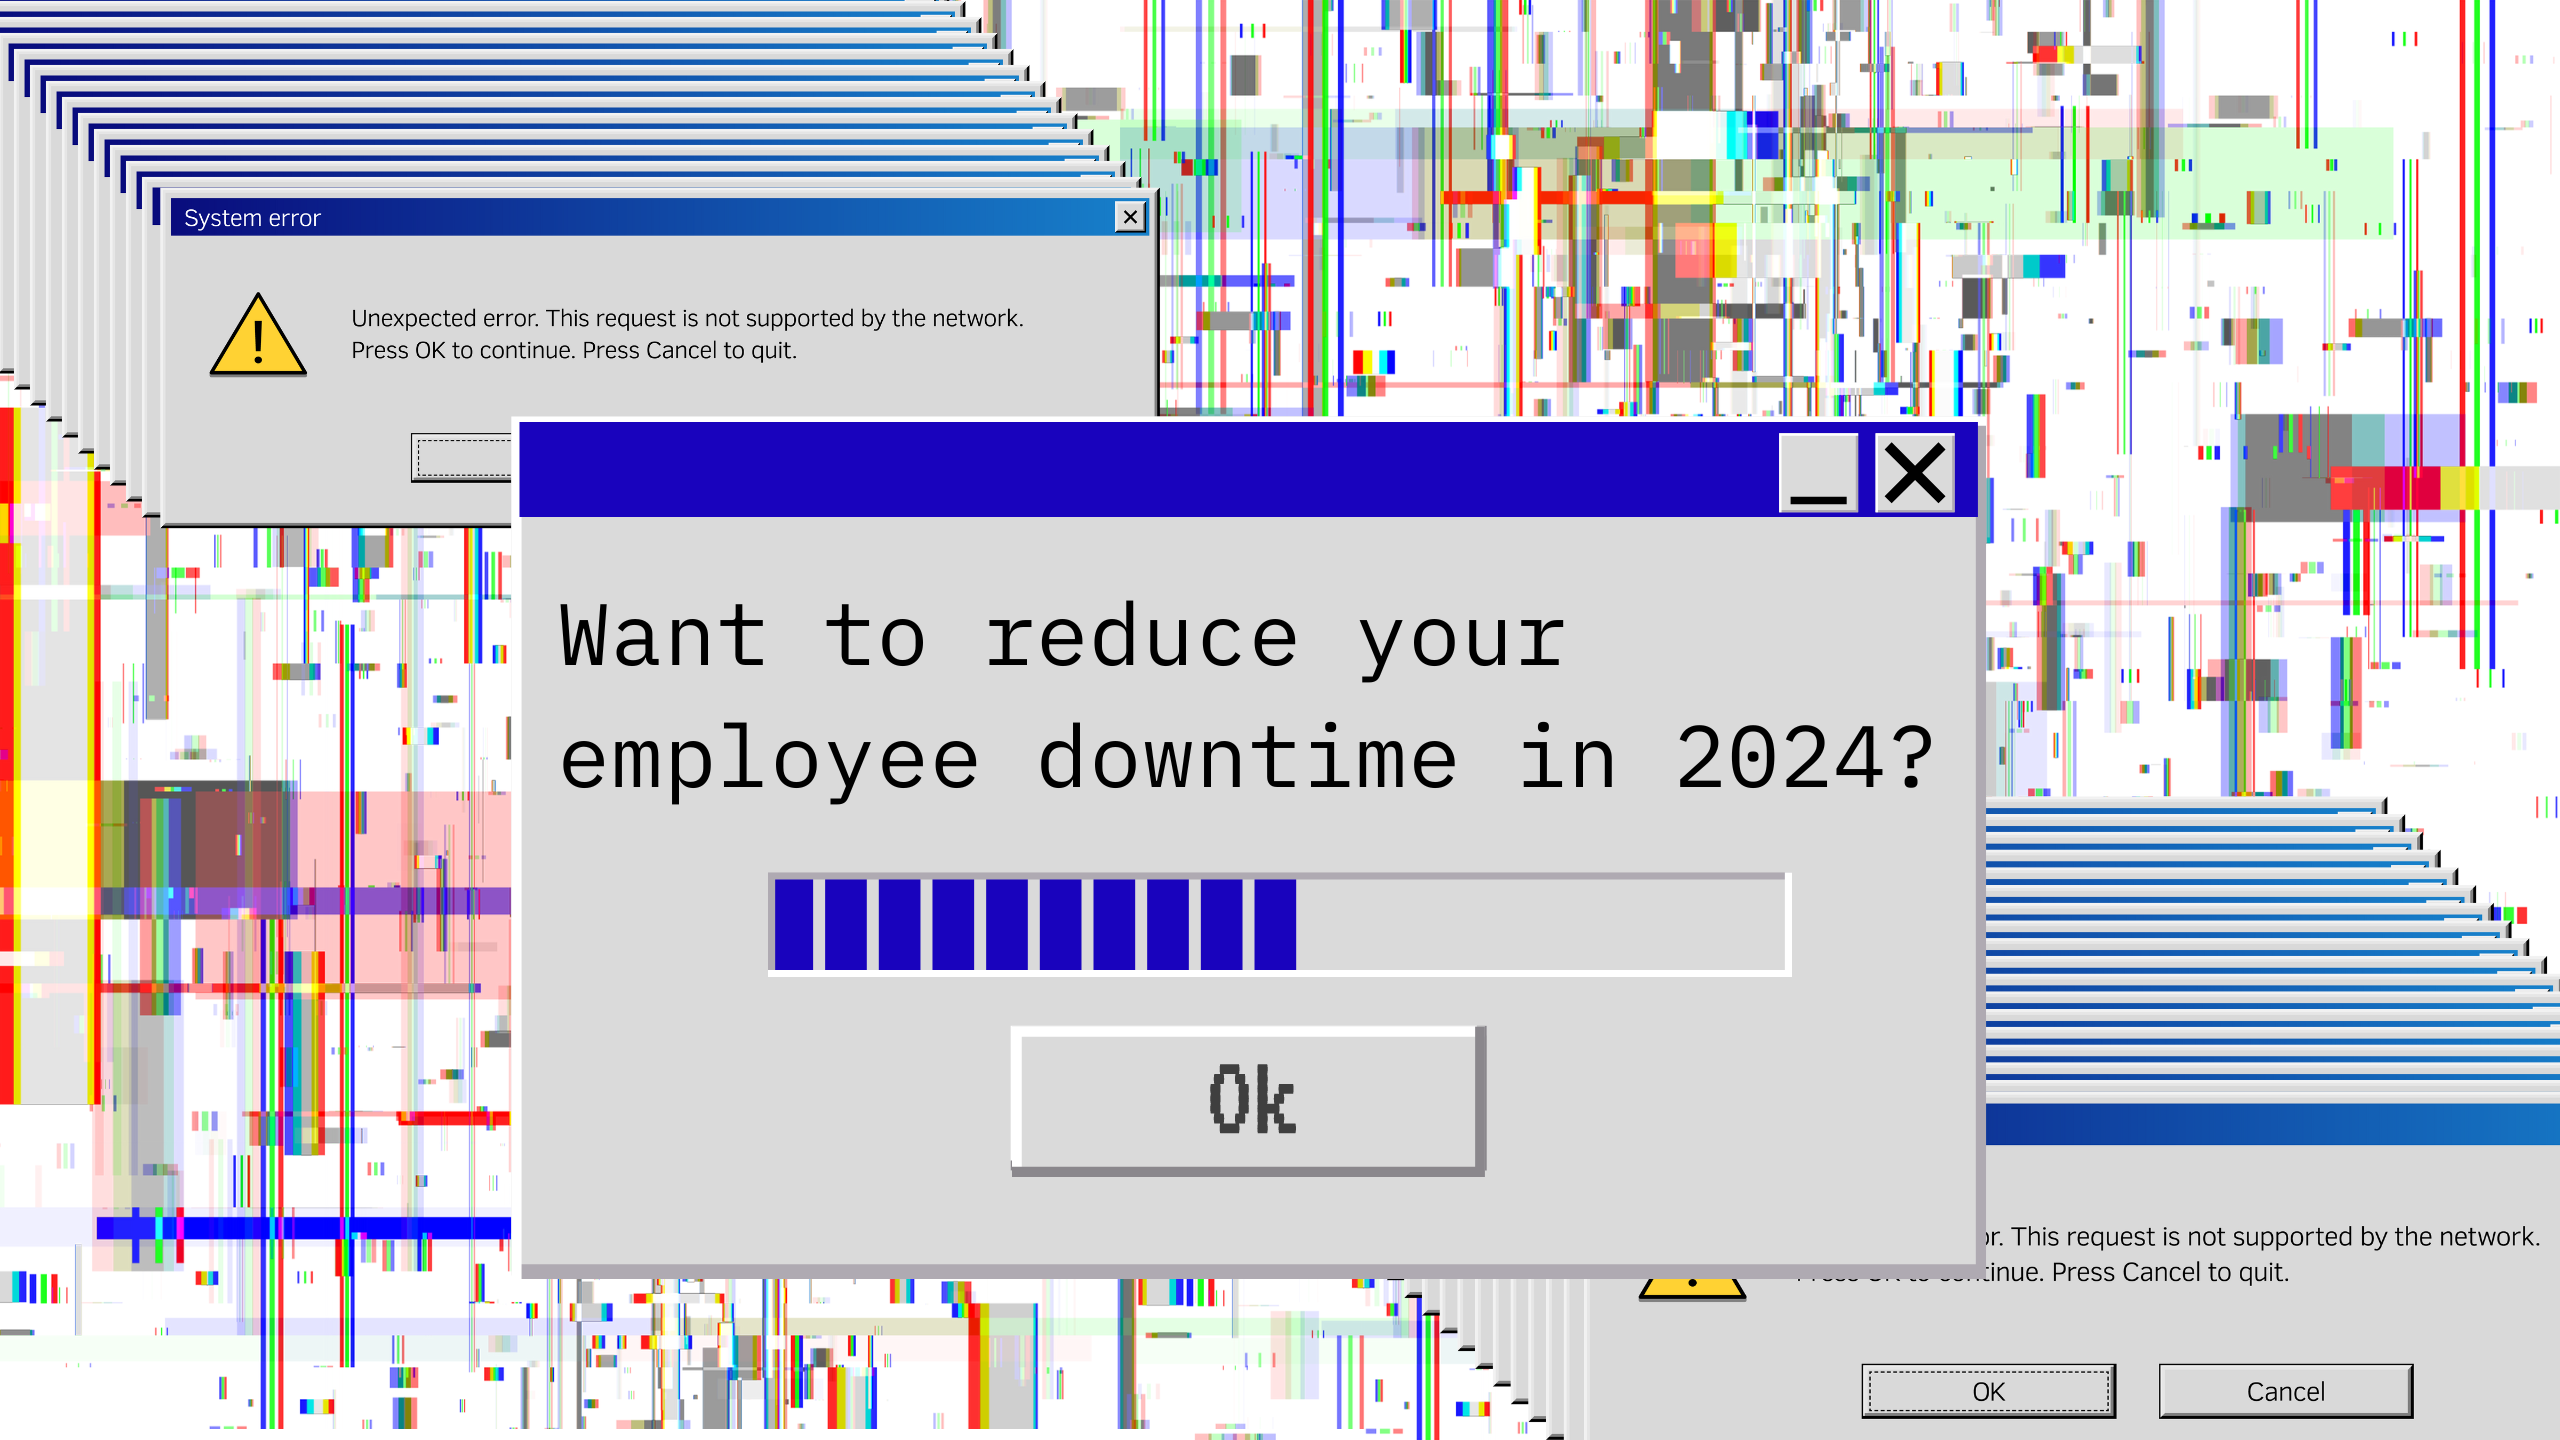 The image shows a broken screen with reducing employee downtime